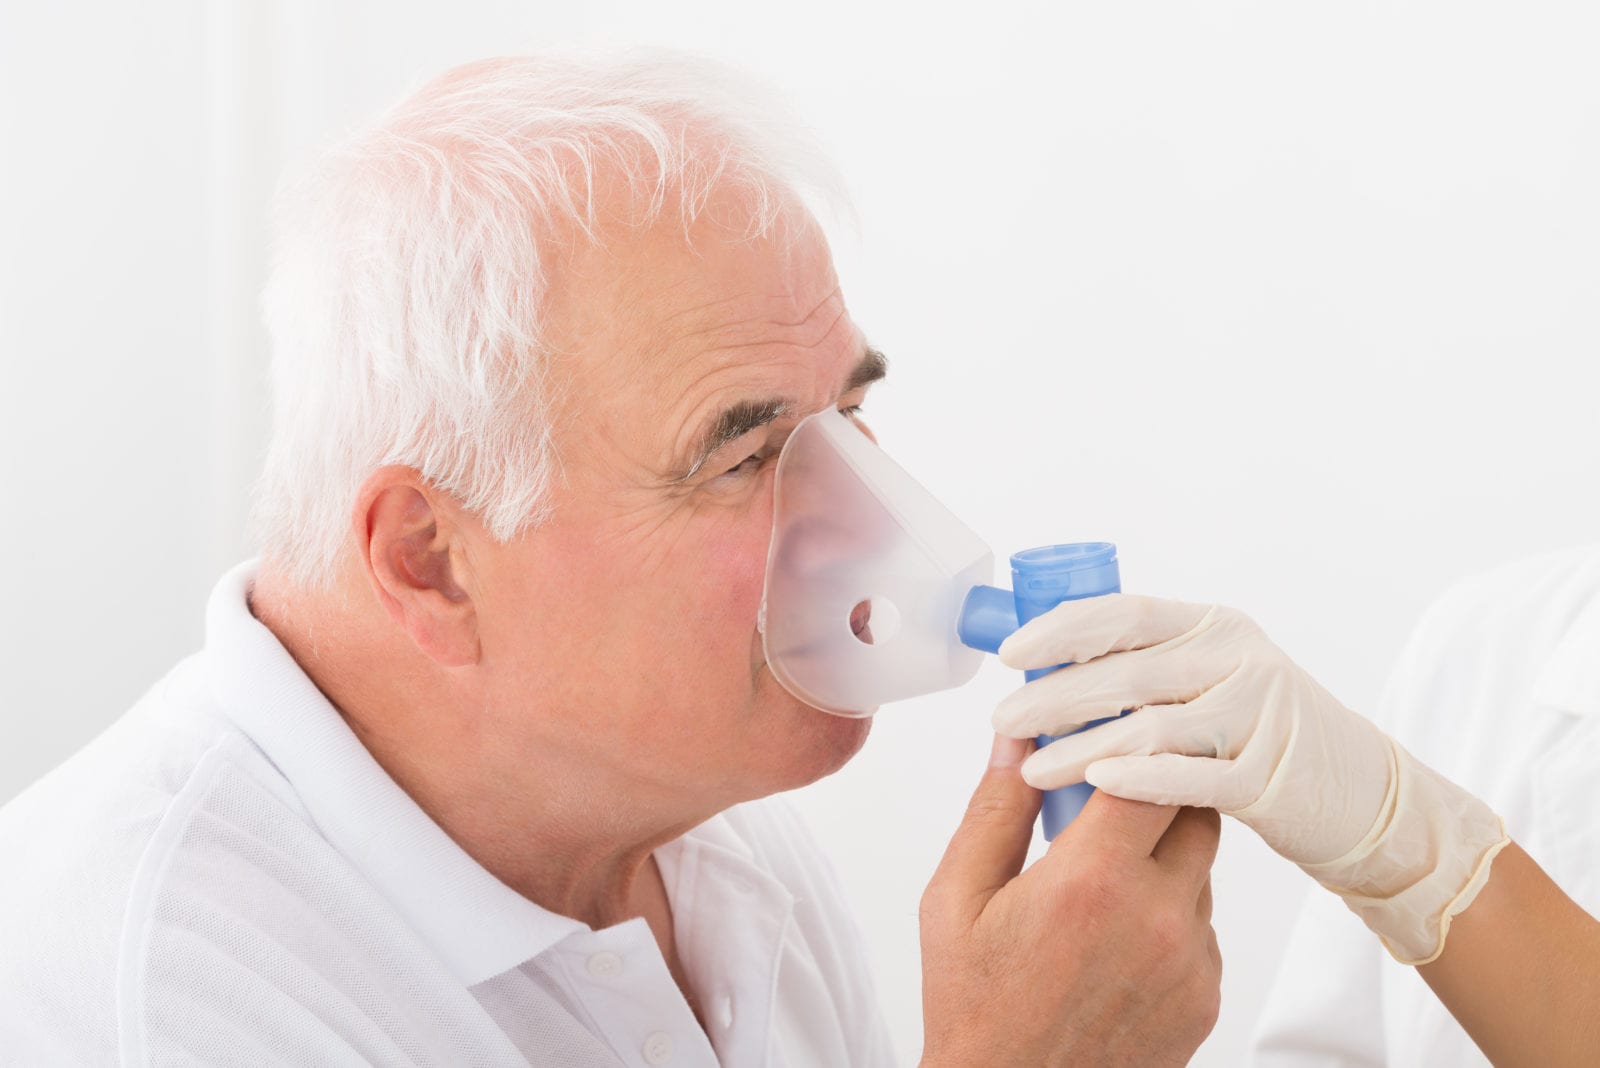 Does Medicare Cover Nebulizers?